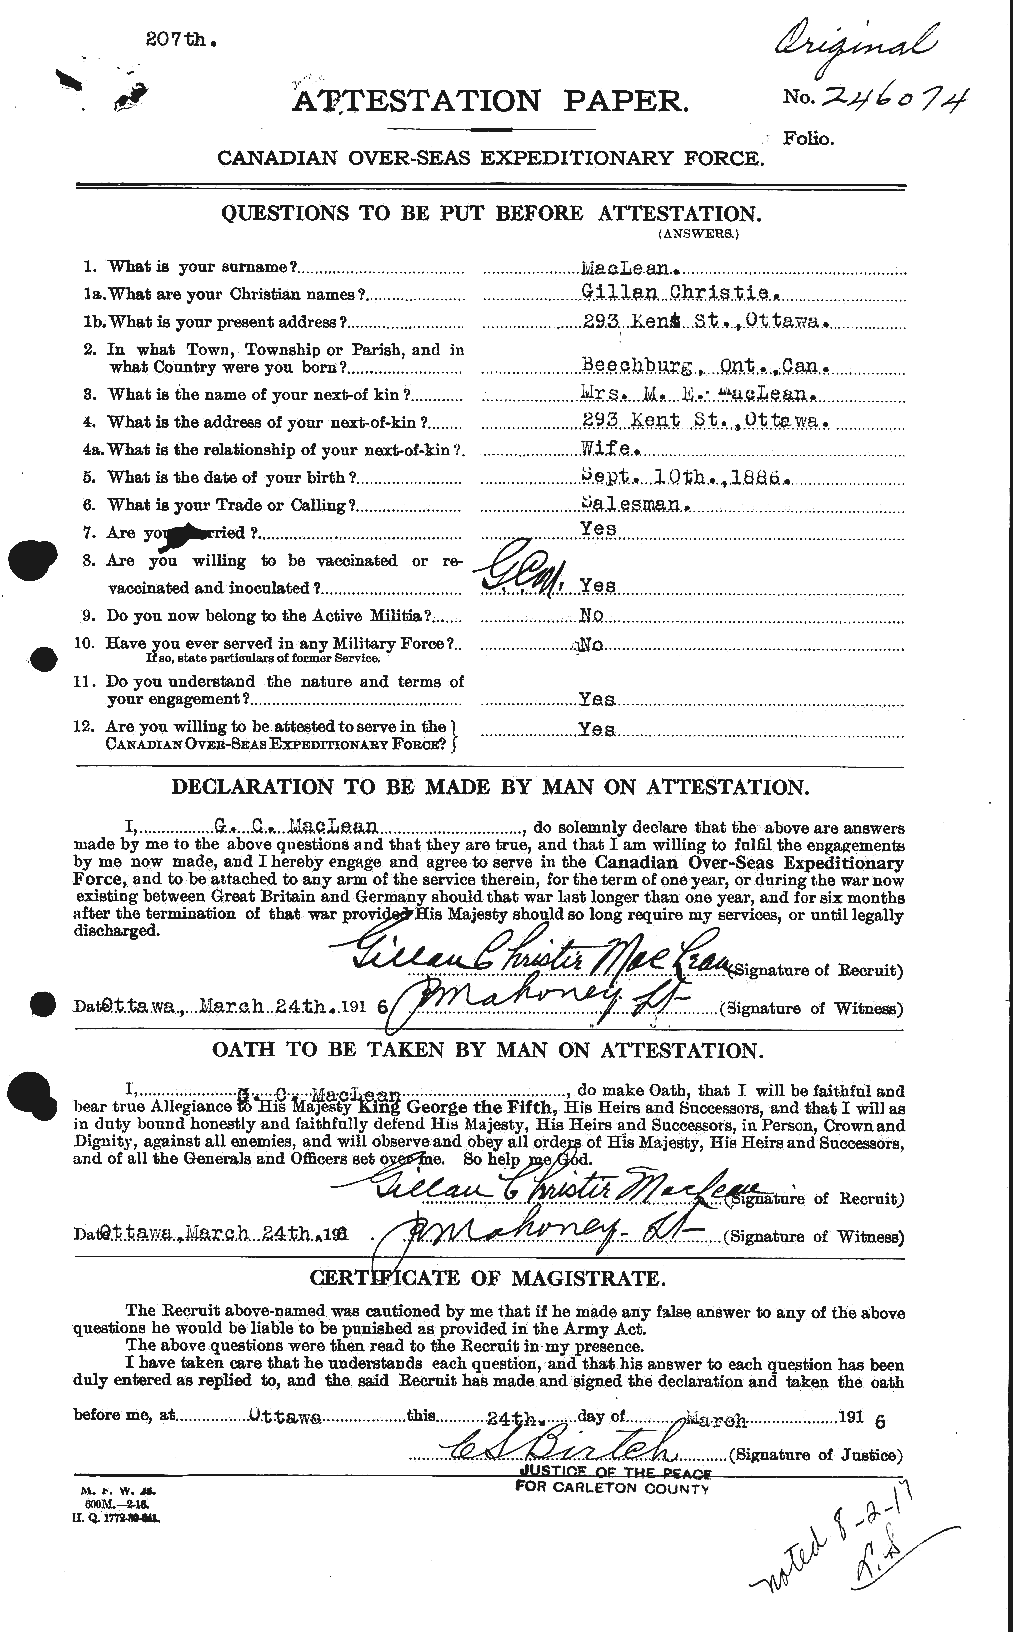 Personnel Records of the First World War - CEF 540299a